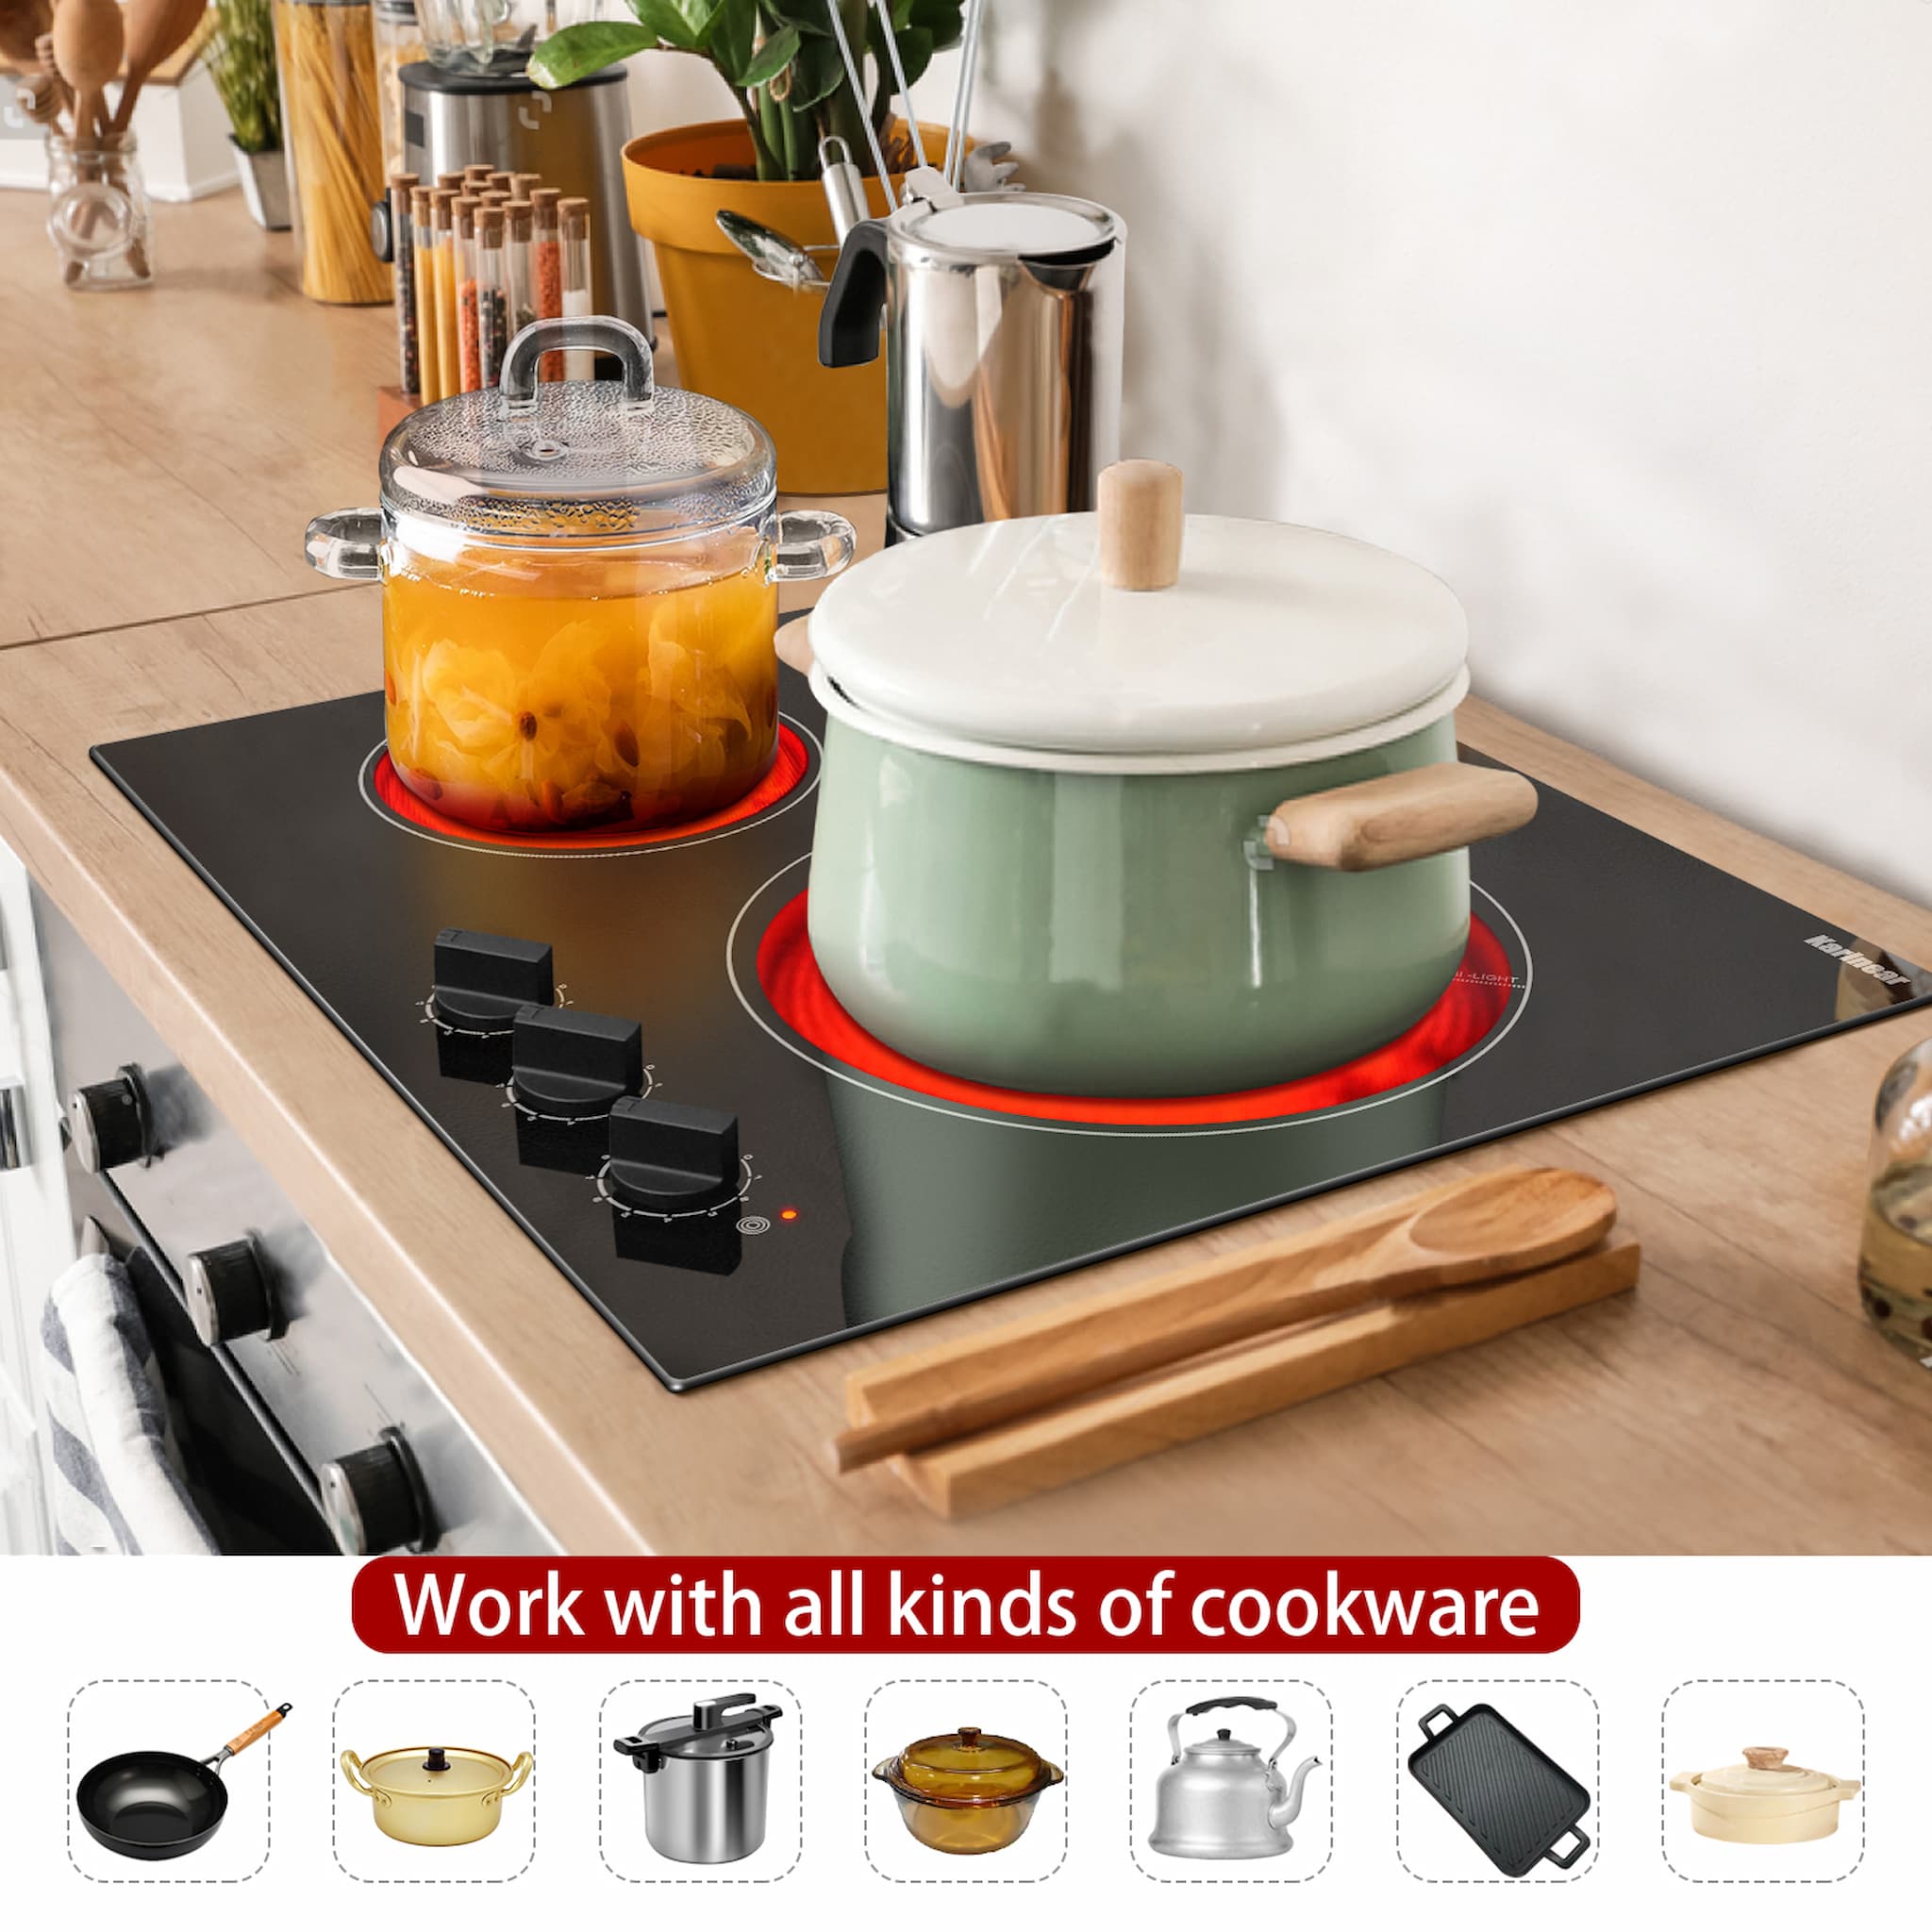 The electric ceramic cooker is very convenient that compatible with any cookware. The cookware with a flat bottom, such as iron, aluminum, stainless steel, and glass cookware are all suitable for use, unlike induction cooktop which has special requirements for cookware material.